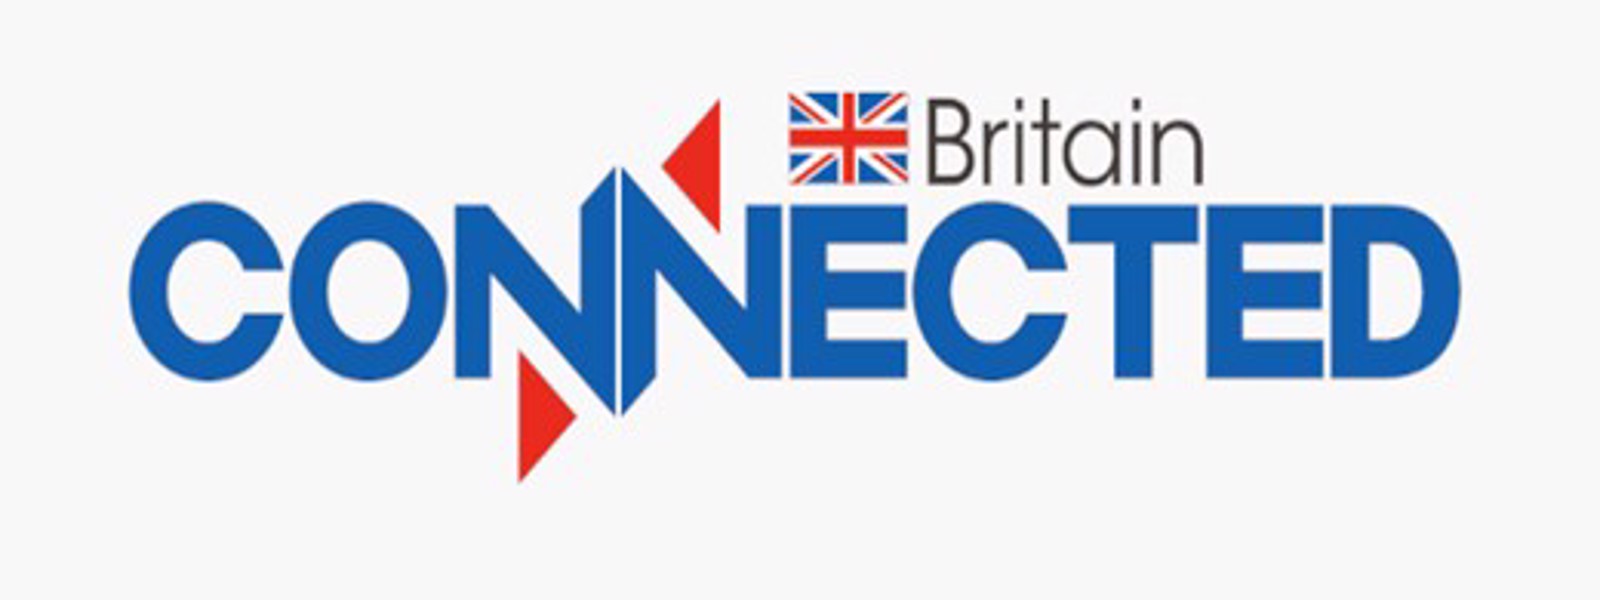 Connected Britain 2023